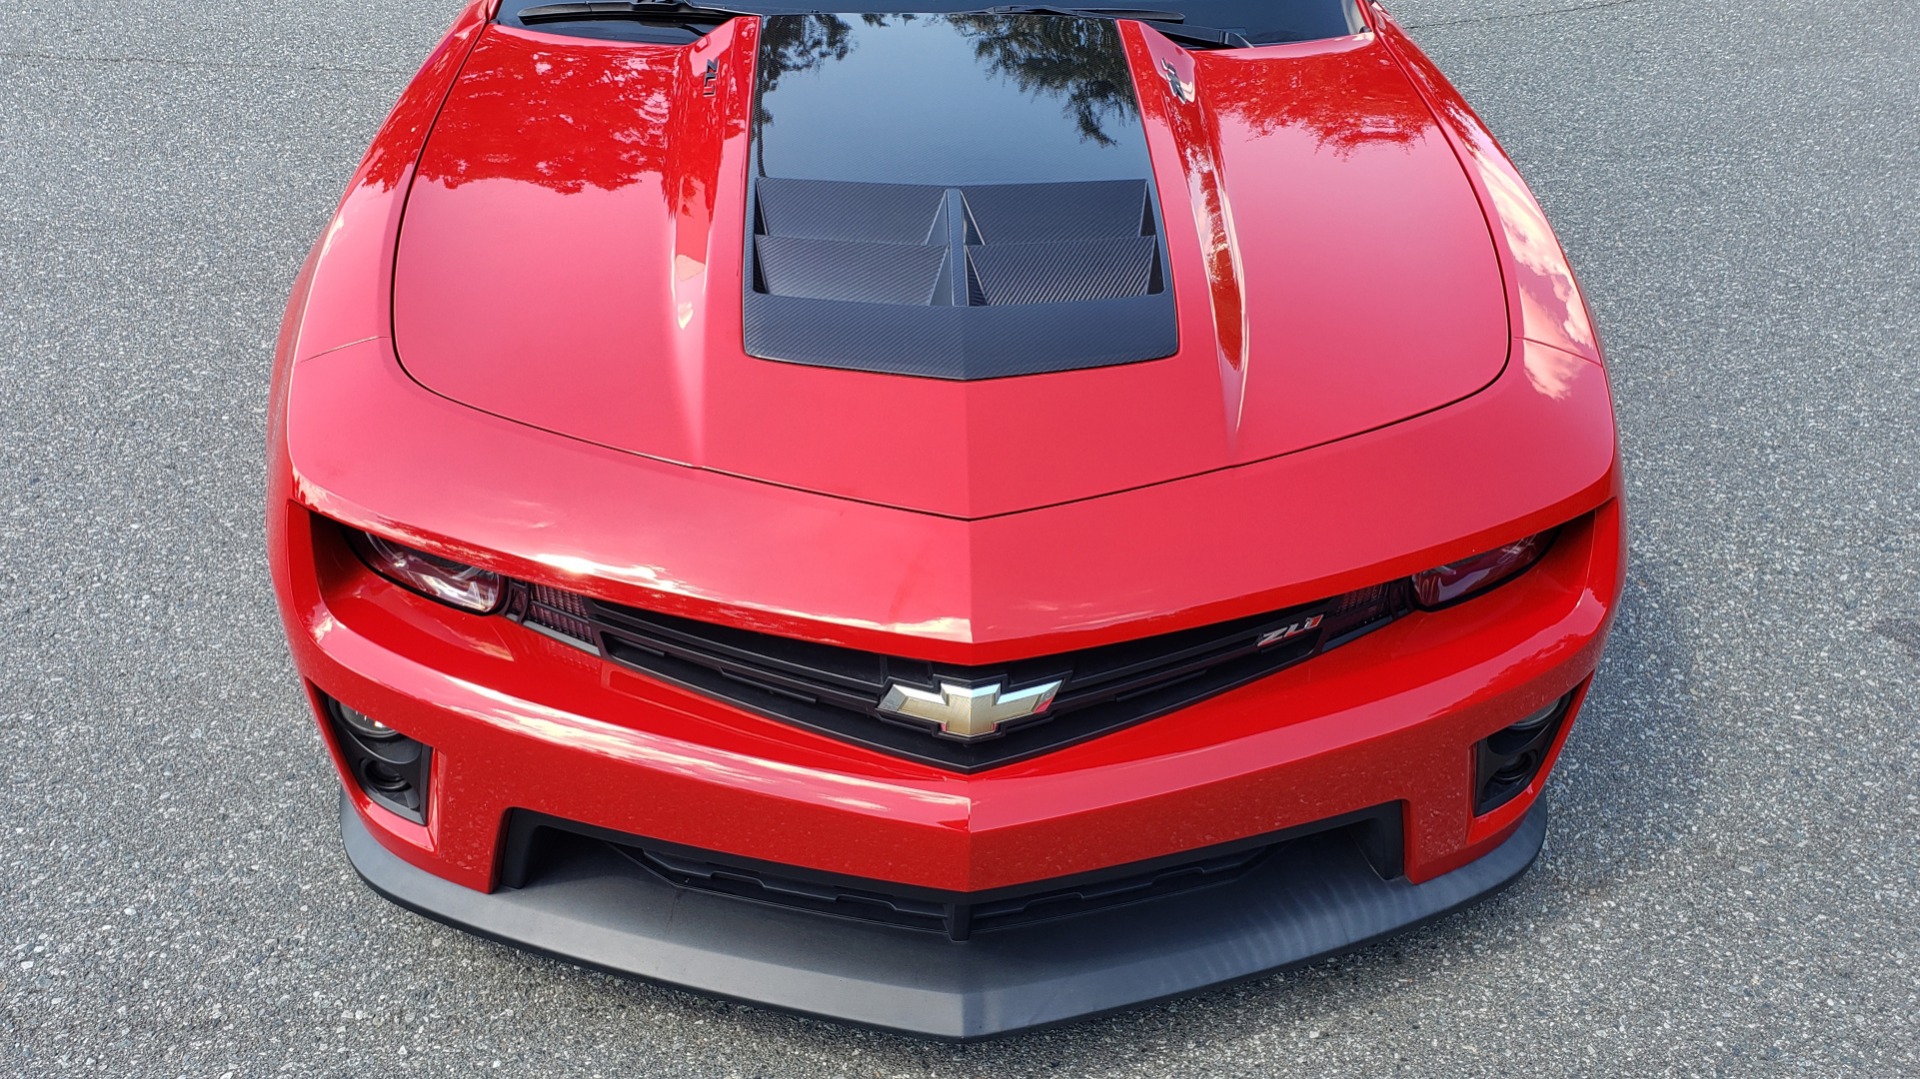 Used 2013 Chevrolet CAMARO ZL1 / 6.2L SUPERCHARGED 580HP / 6-SPD AUTO / NAV / REARVIEW for sale Sold at Formula Imports in Charlotte NC 28227 26